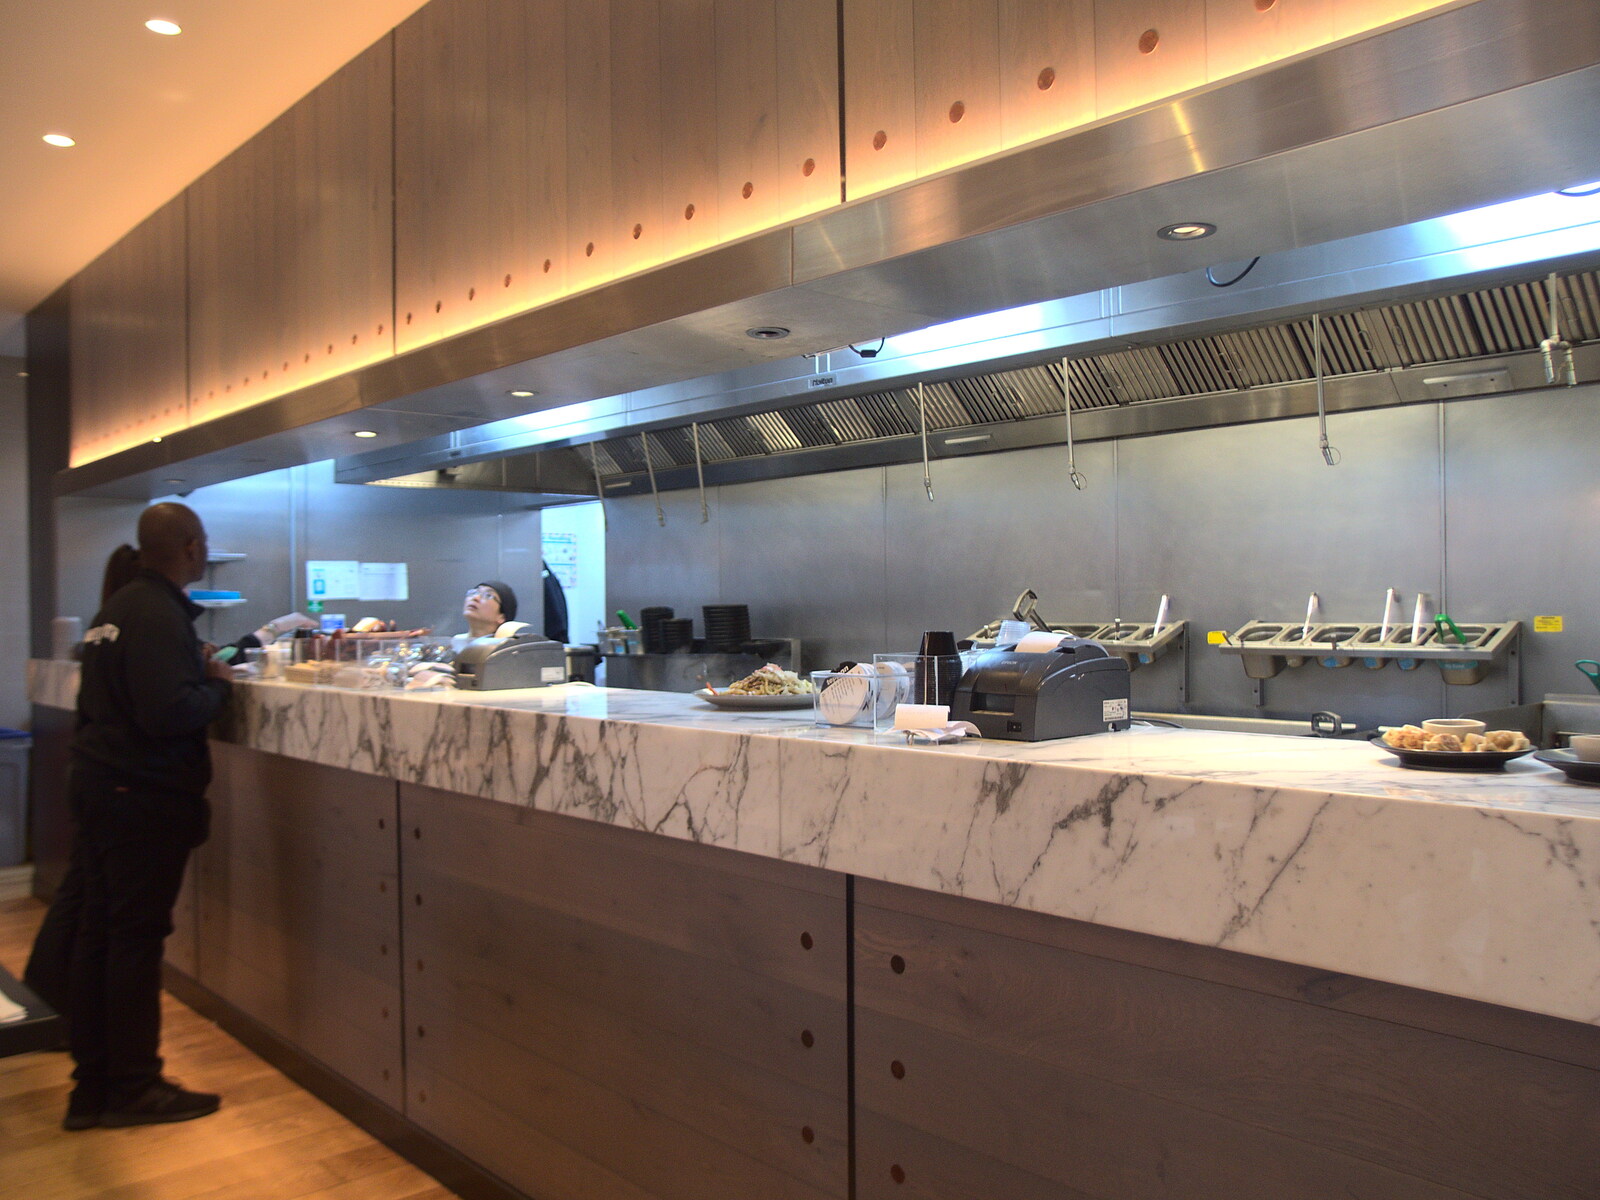 Wagamama's kitchen, where we have lunch from A Shopping Trip to Bury St. Edmunds, Suffolk - 14th December 2022